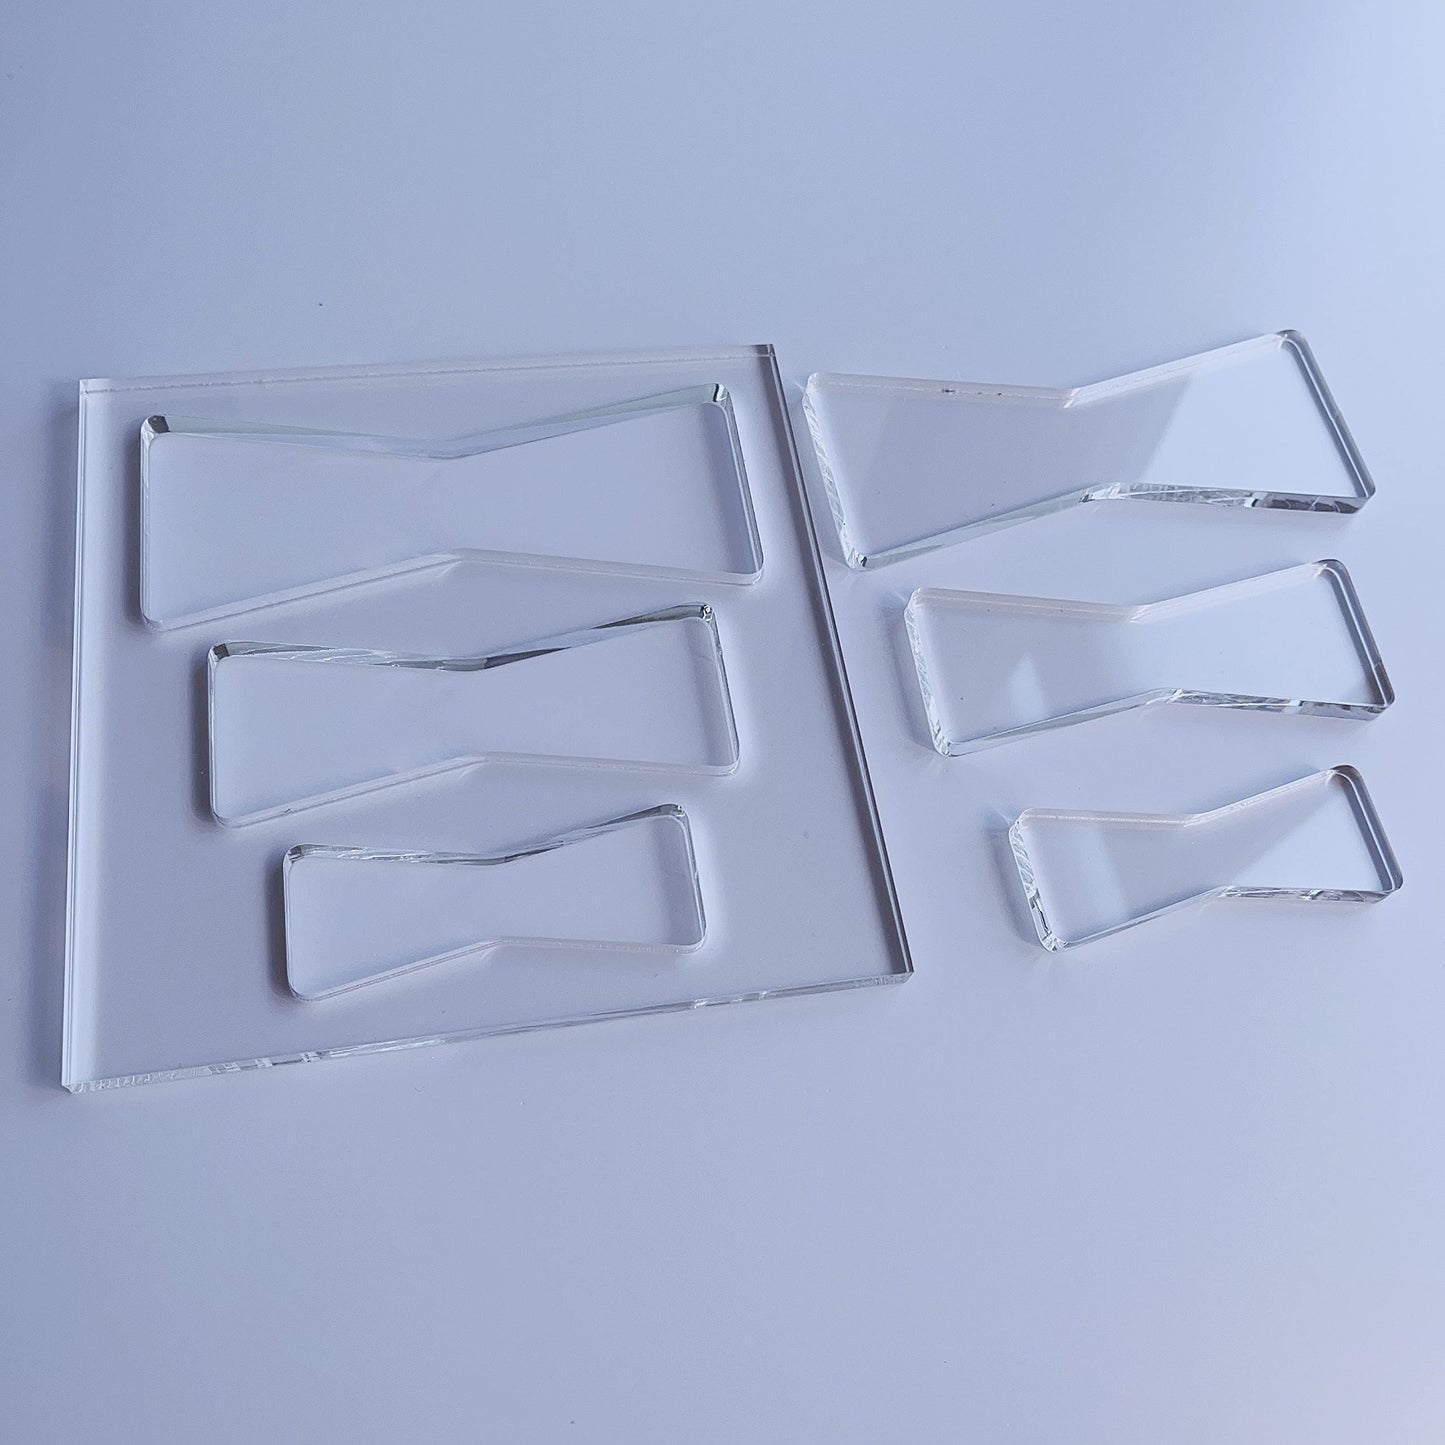 Bow Tie Router Template, Clear Acrylic Template, Woodworking Router Template